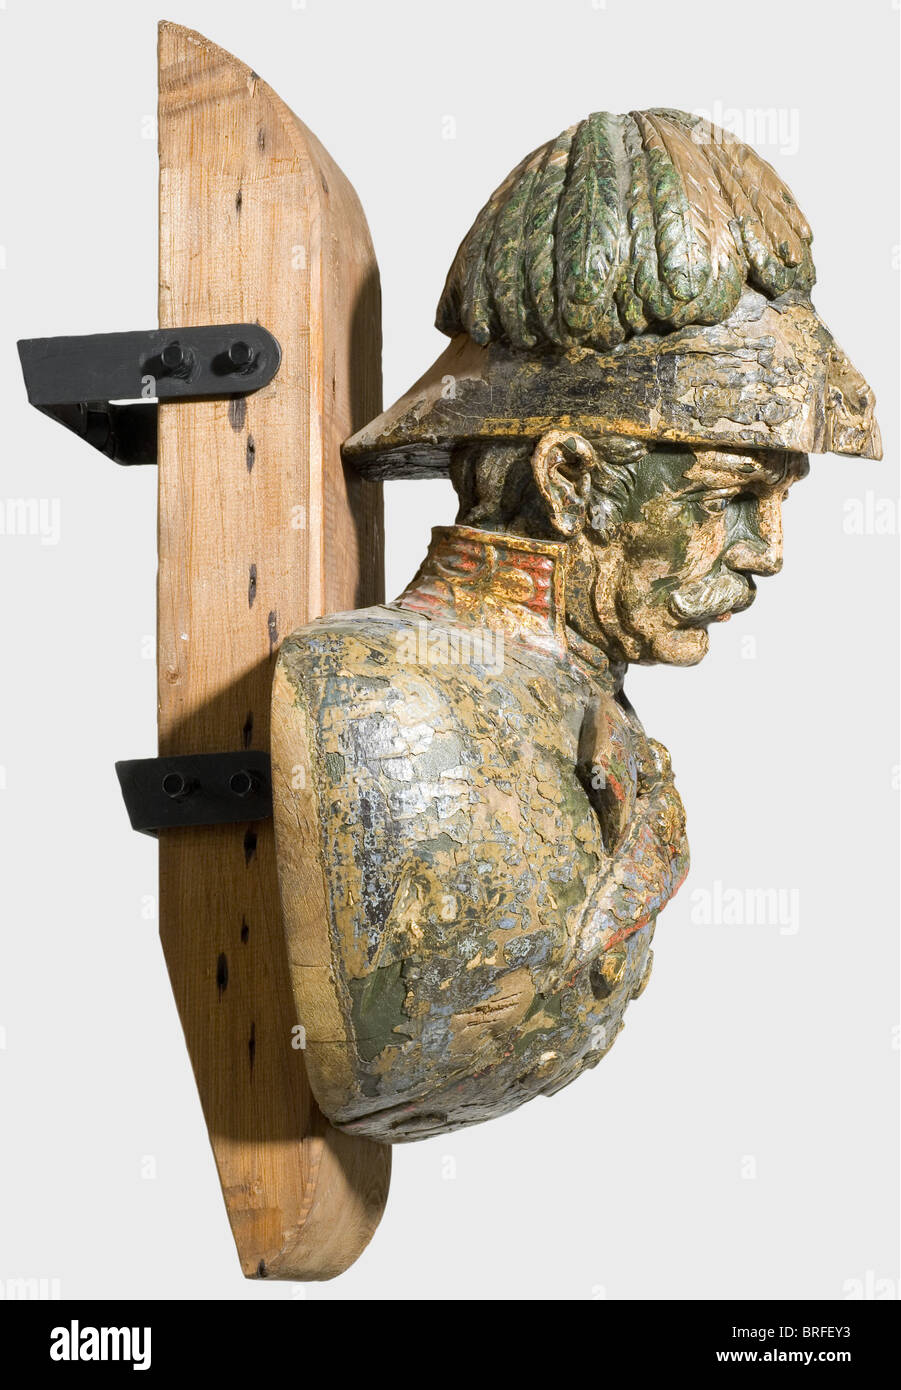 Figurehead SMS 'Radetzky'., Colour portrait bust of field marshal Radetzky, wood, 60 x 50 x 30 cm. Thick paint coat, partially brittle and splintered, the front part of the hat chipped due to manoeuvre damage. The bust fastened to a wood beam with wall mounting device. The screw frigate 'Radetzky' was equipped with 37 cannons and had a crew of 372 men. Under the command of Admiral von Tegetthoff and with Franz Jeremiasch as captain of the ship, the 'Radetzky' took part in the naval battle against the Danes near Helgoland in 1864. Von Tegetthoff's ship, the SMS , Stock Photo